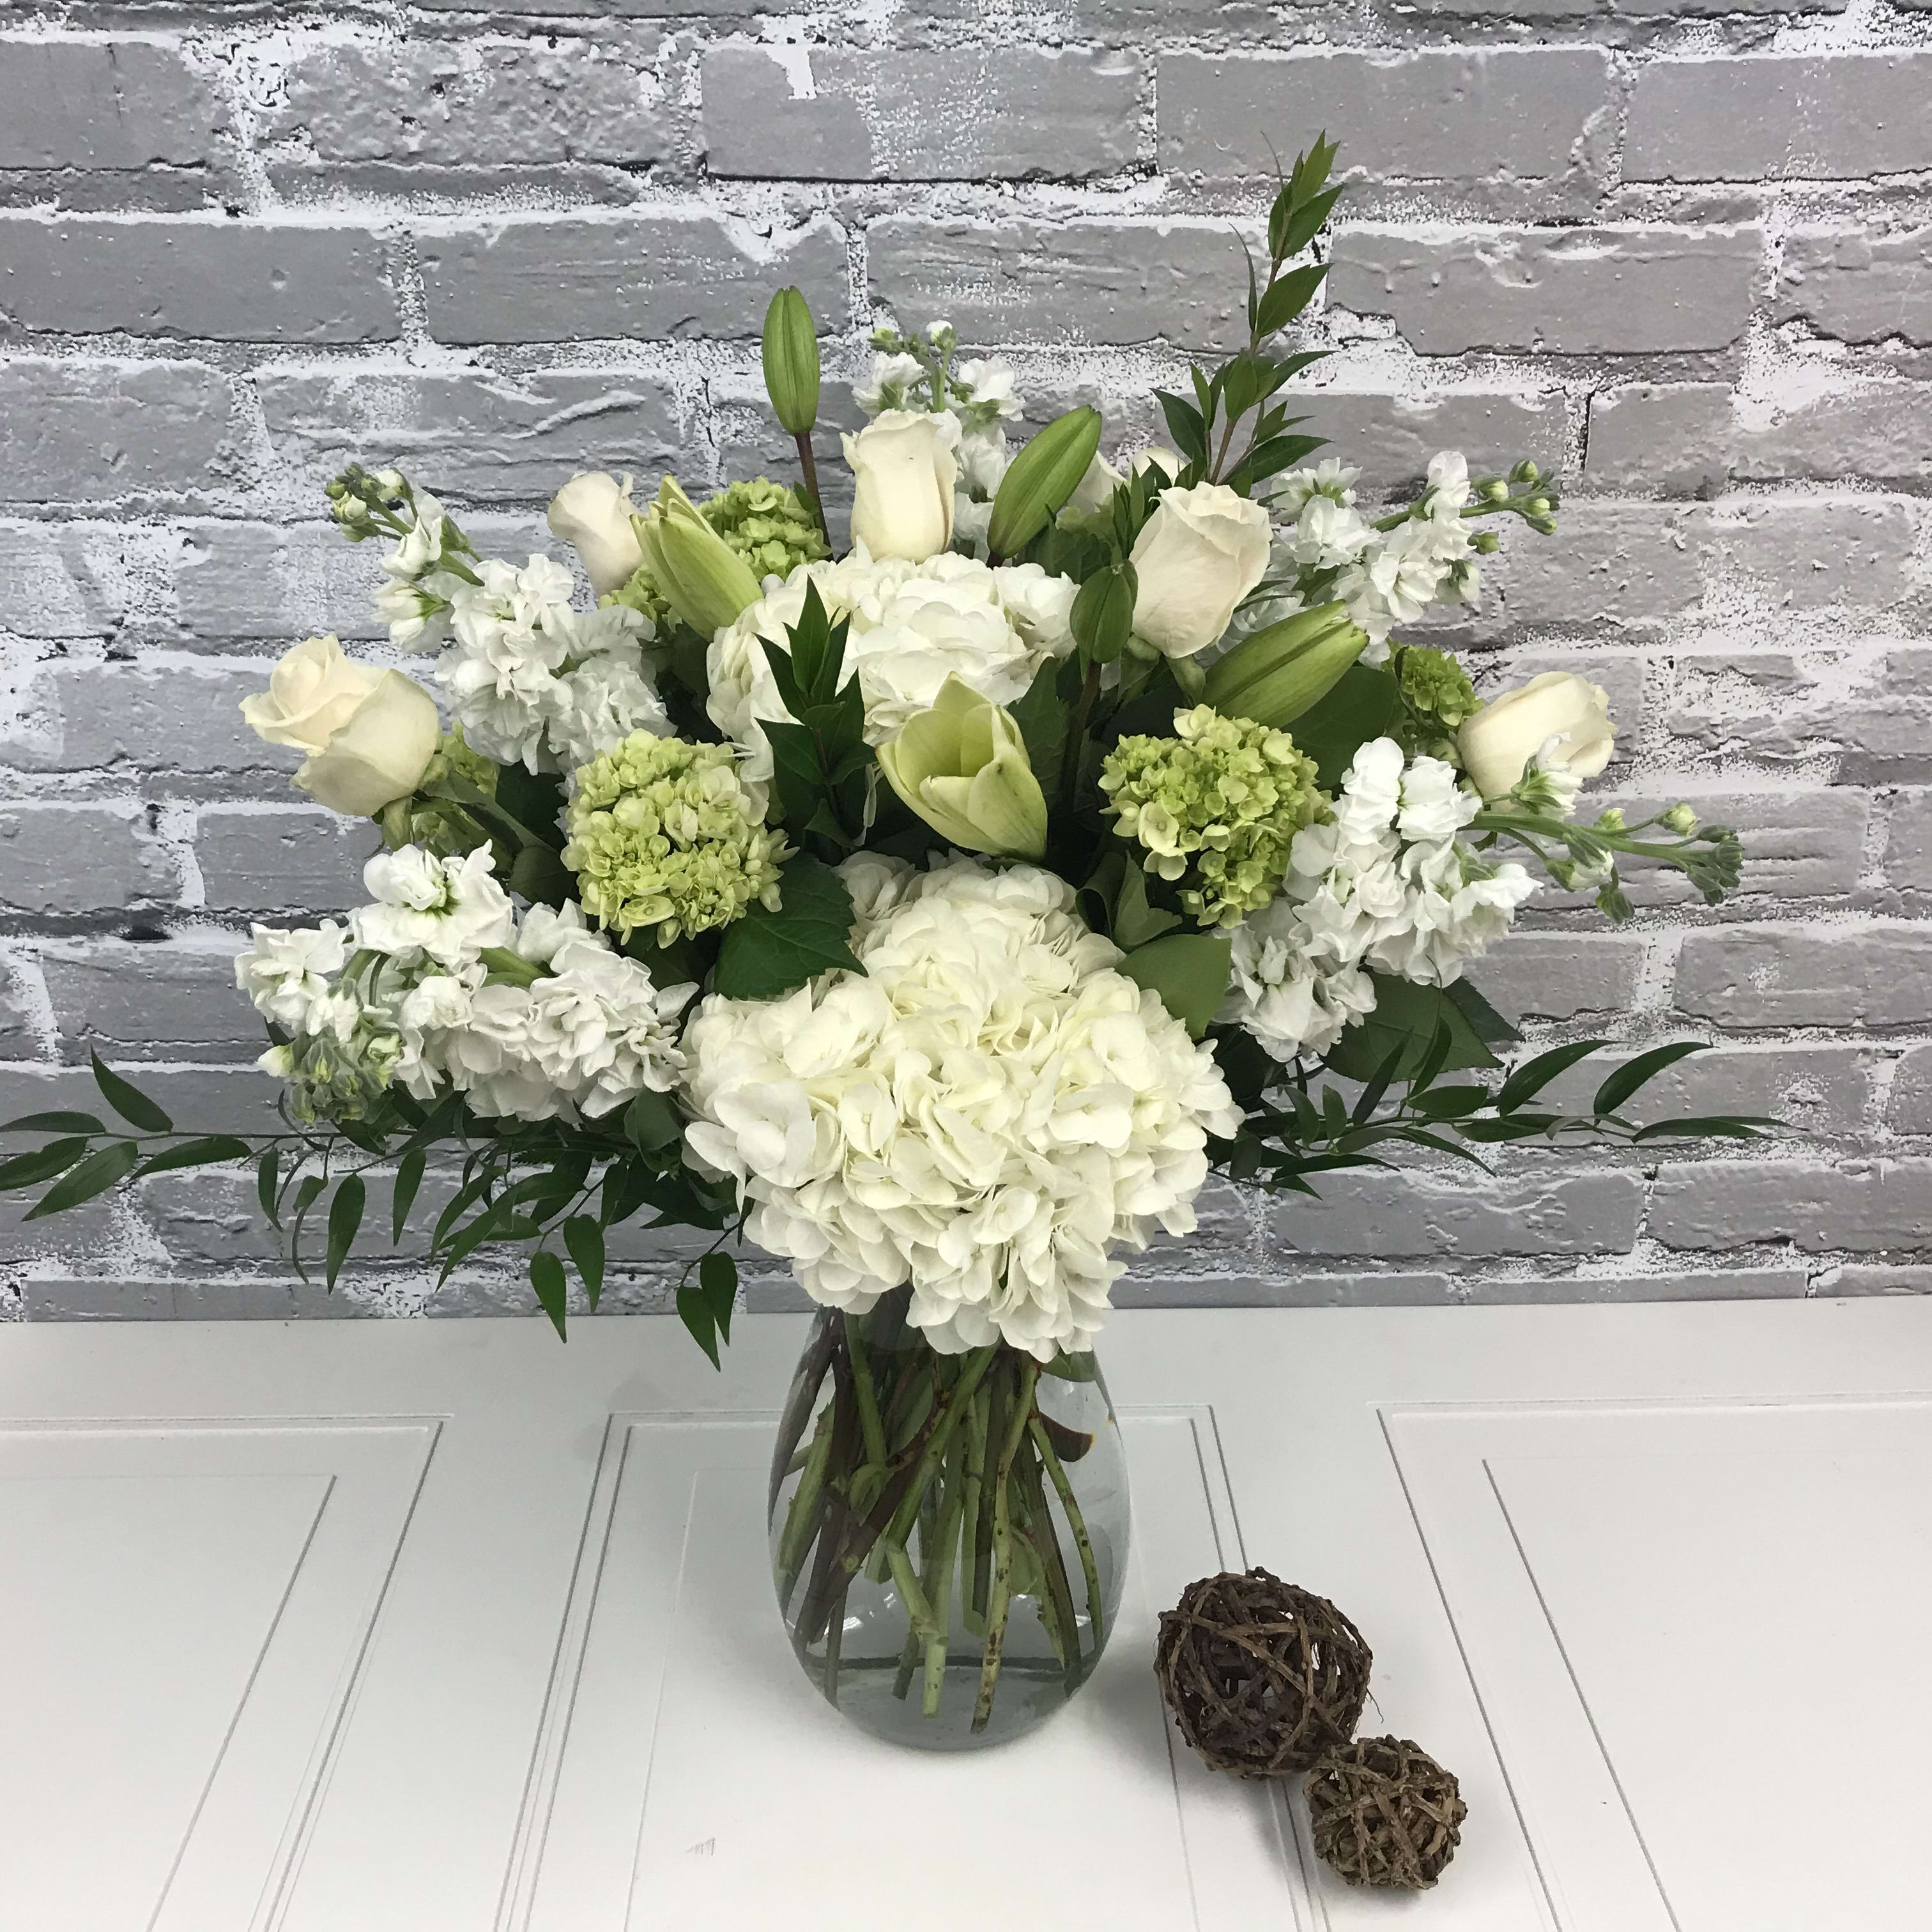 Peaceful - Grand vase with white and green hydrangeas, roses, stock (or snapdragons) and white lilies. Truly gorgeous. 